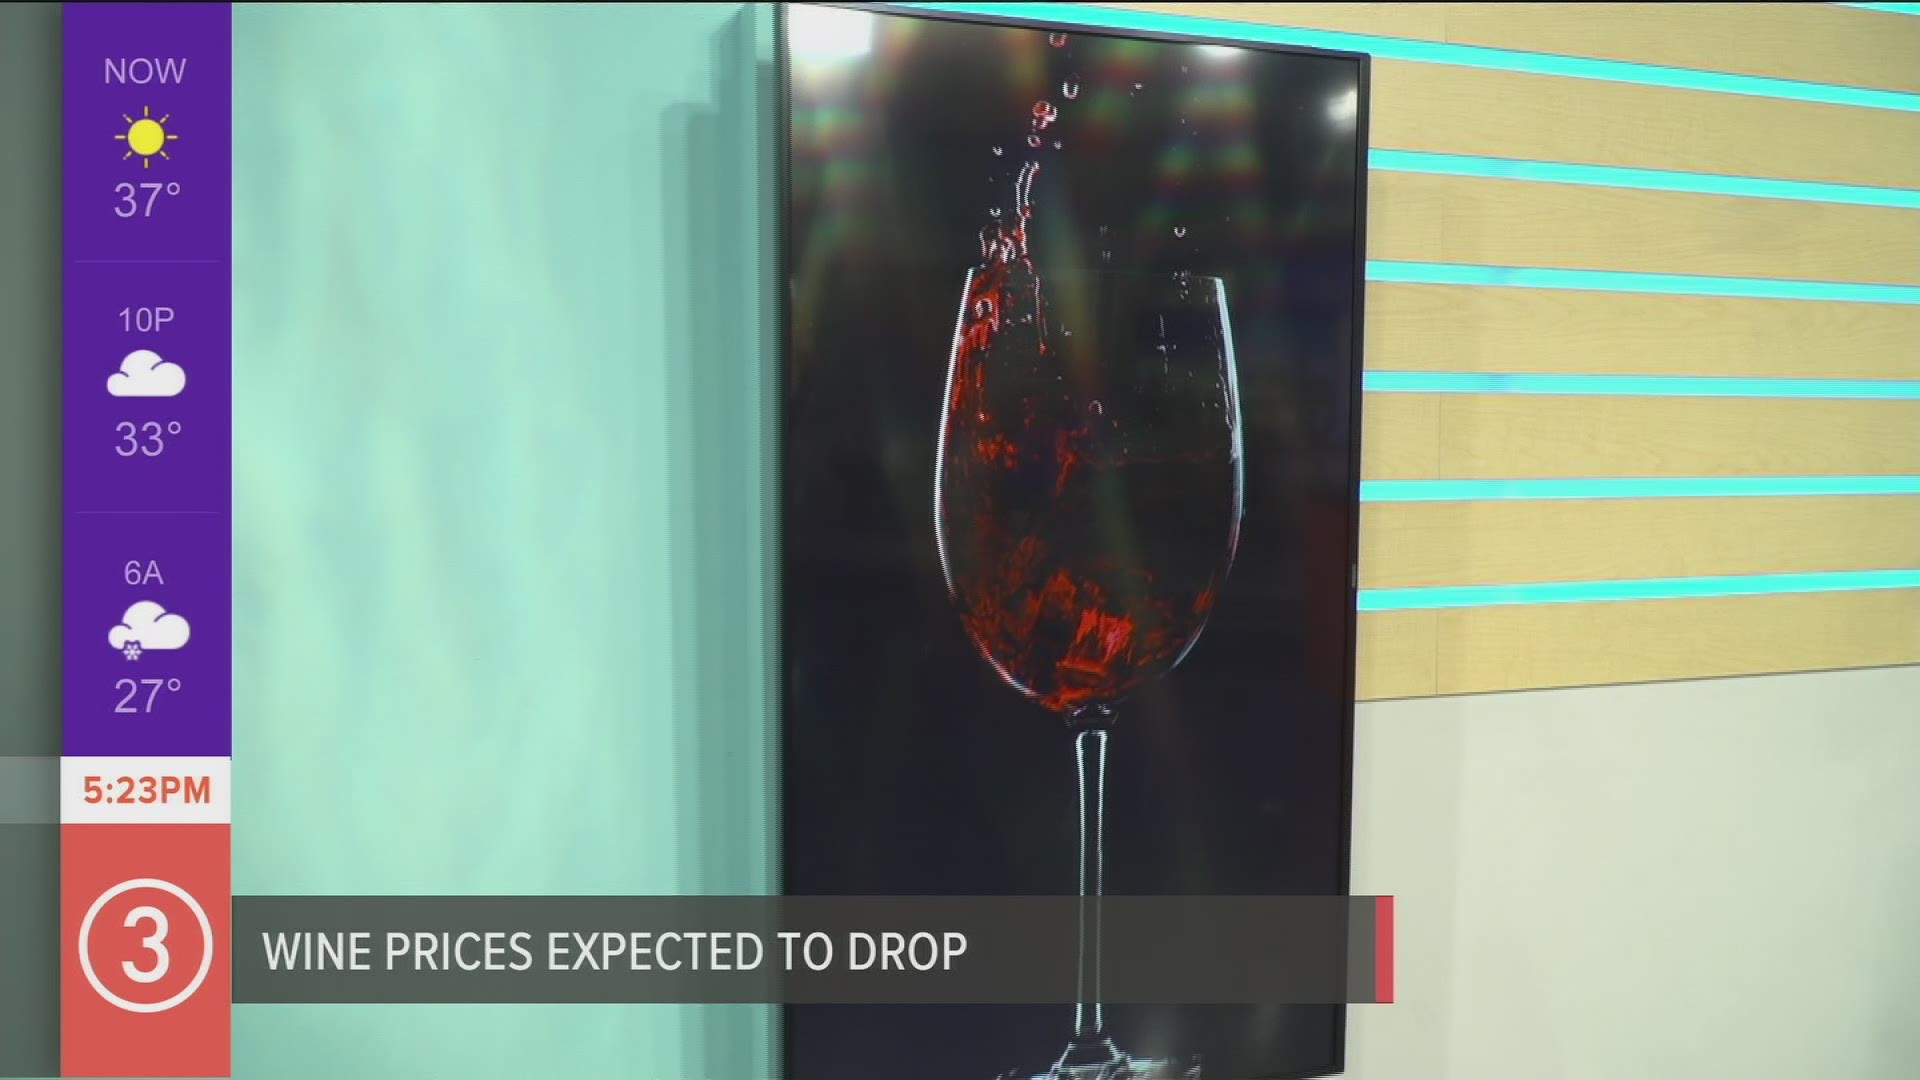 Wine prices are about to drop! That means it's a great time to sample some wines as we see what will be trending this Spring.